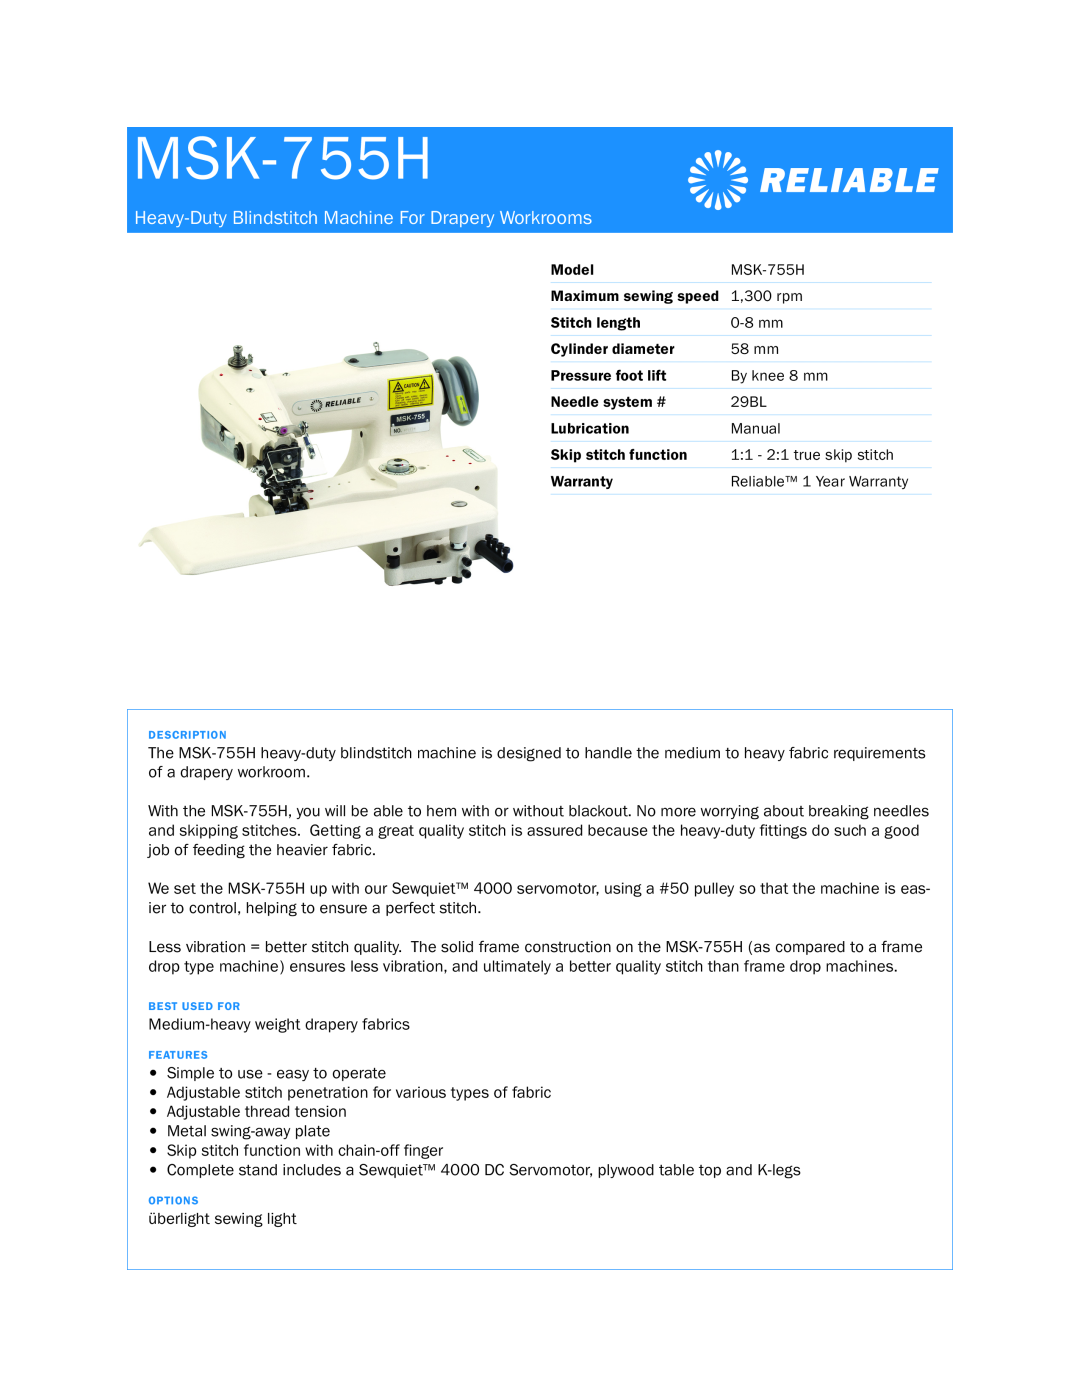 Reliable MSK-755H warranty Heavy-Duty Blindstitch Machine For Drapery Workrooms, Model, Maximum sewing speed, Lubrication 